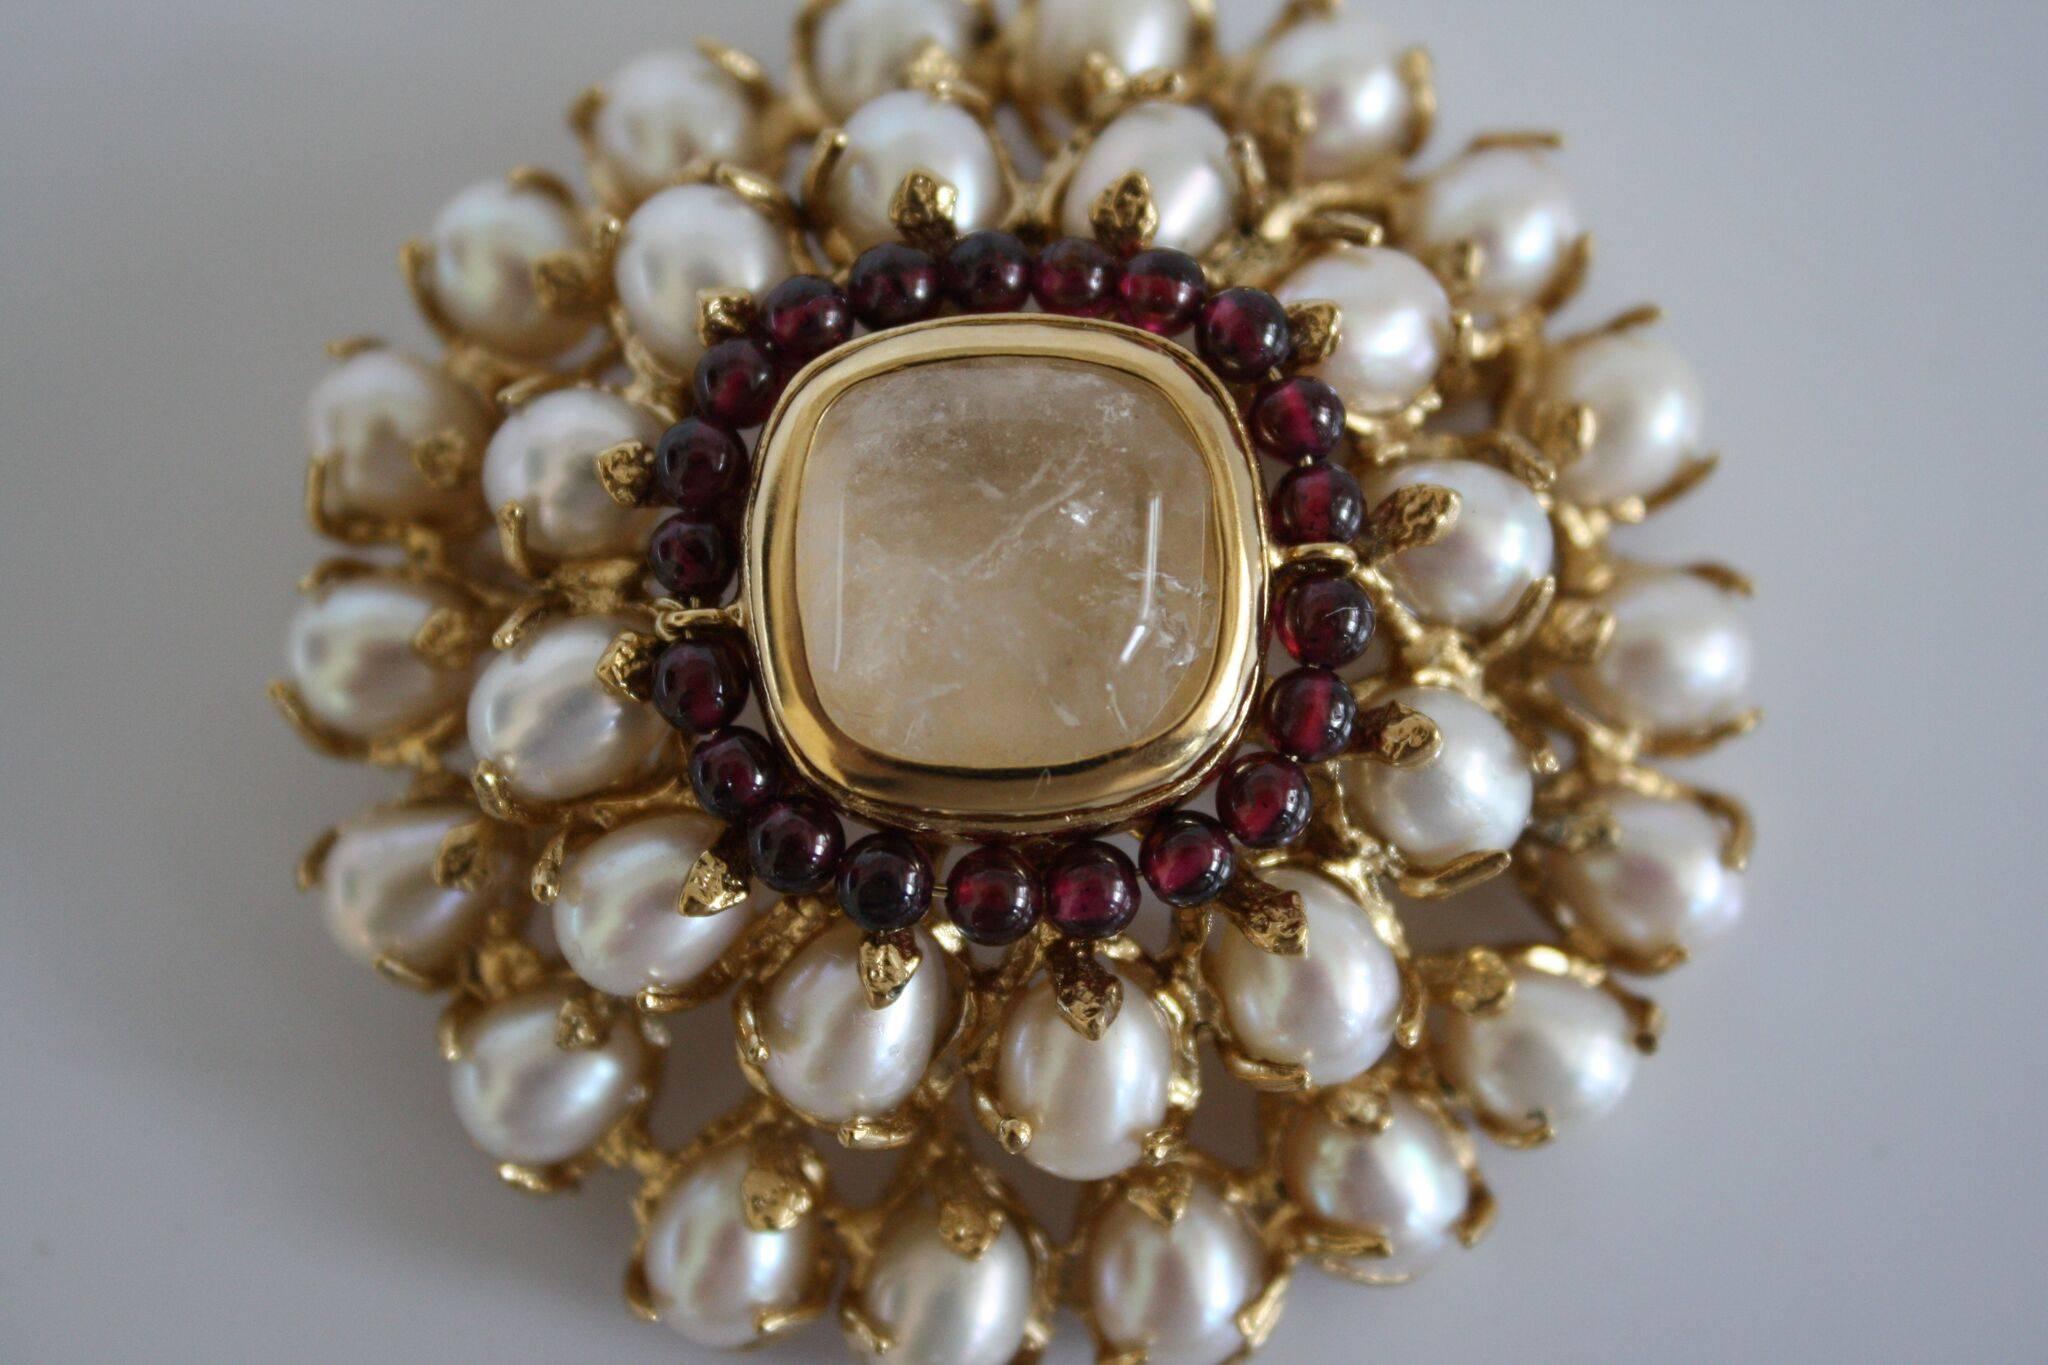 Baroque pearl, garnet, and rock crystal classic brooch from famed french design house Goossens Paris. 

2.25